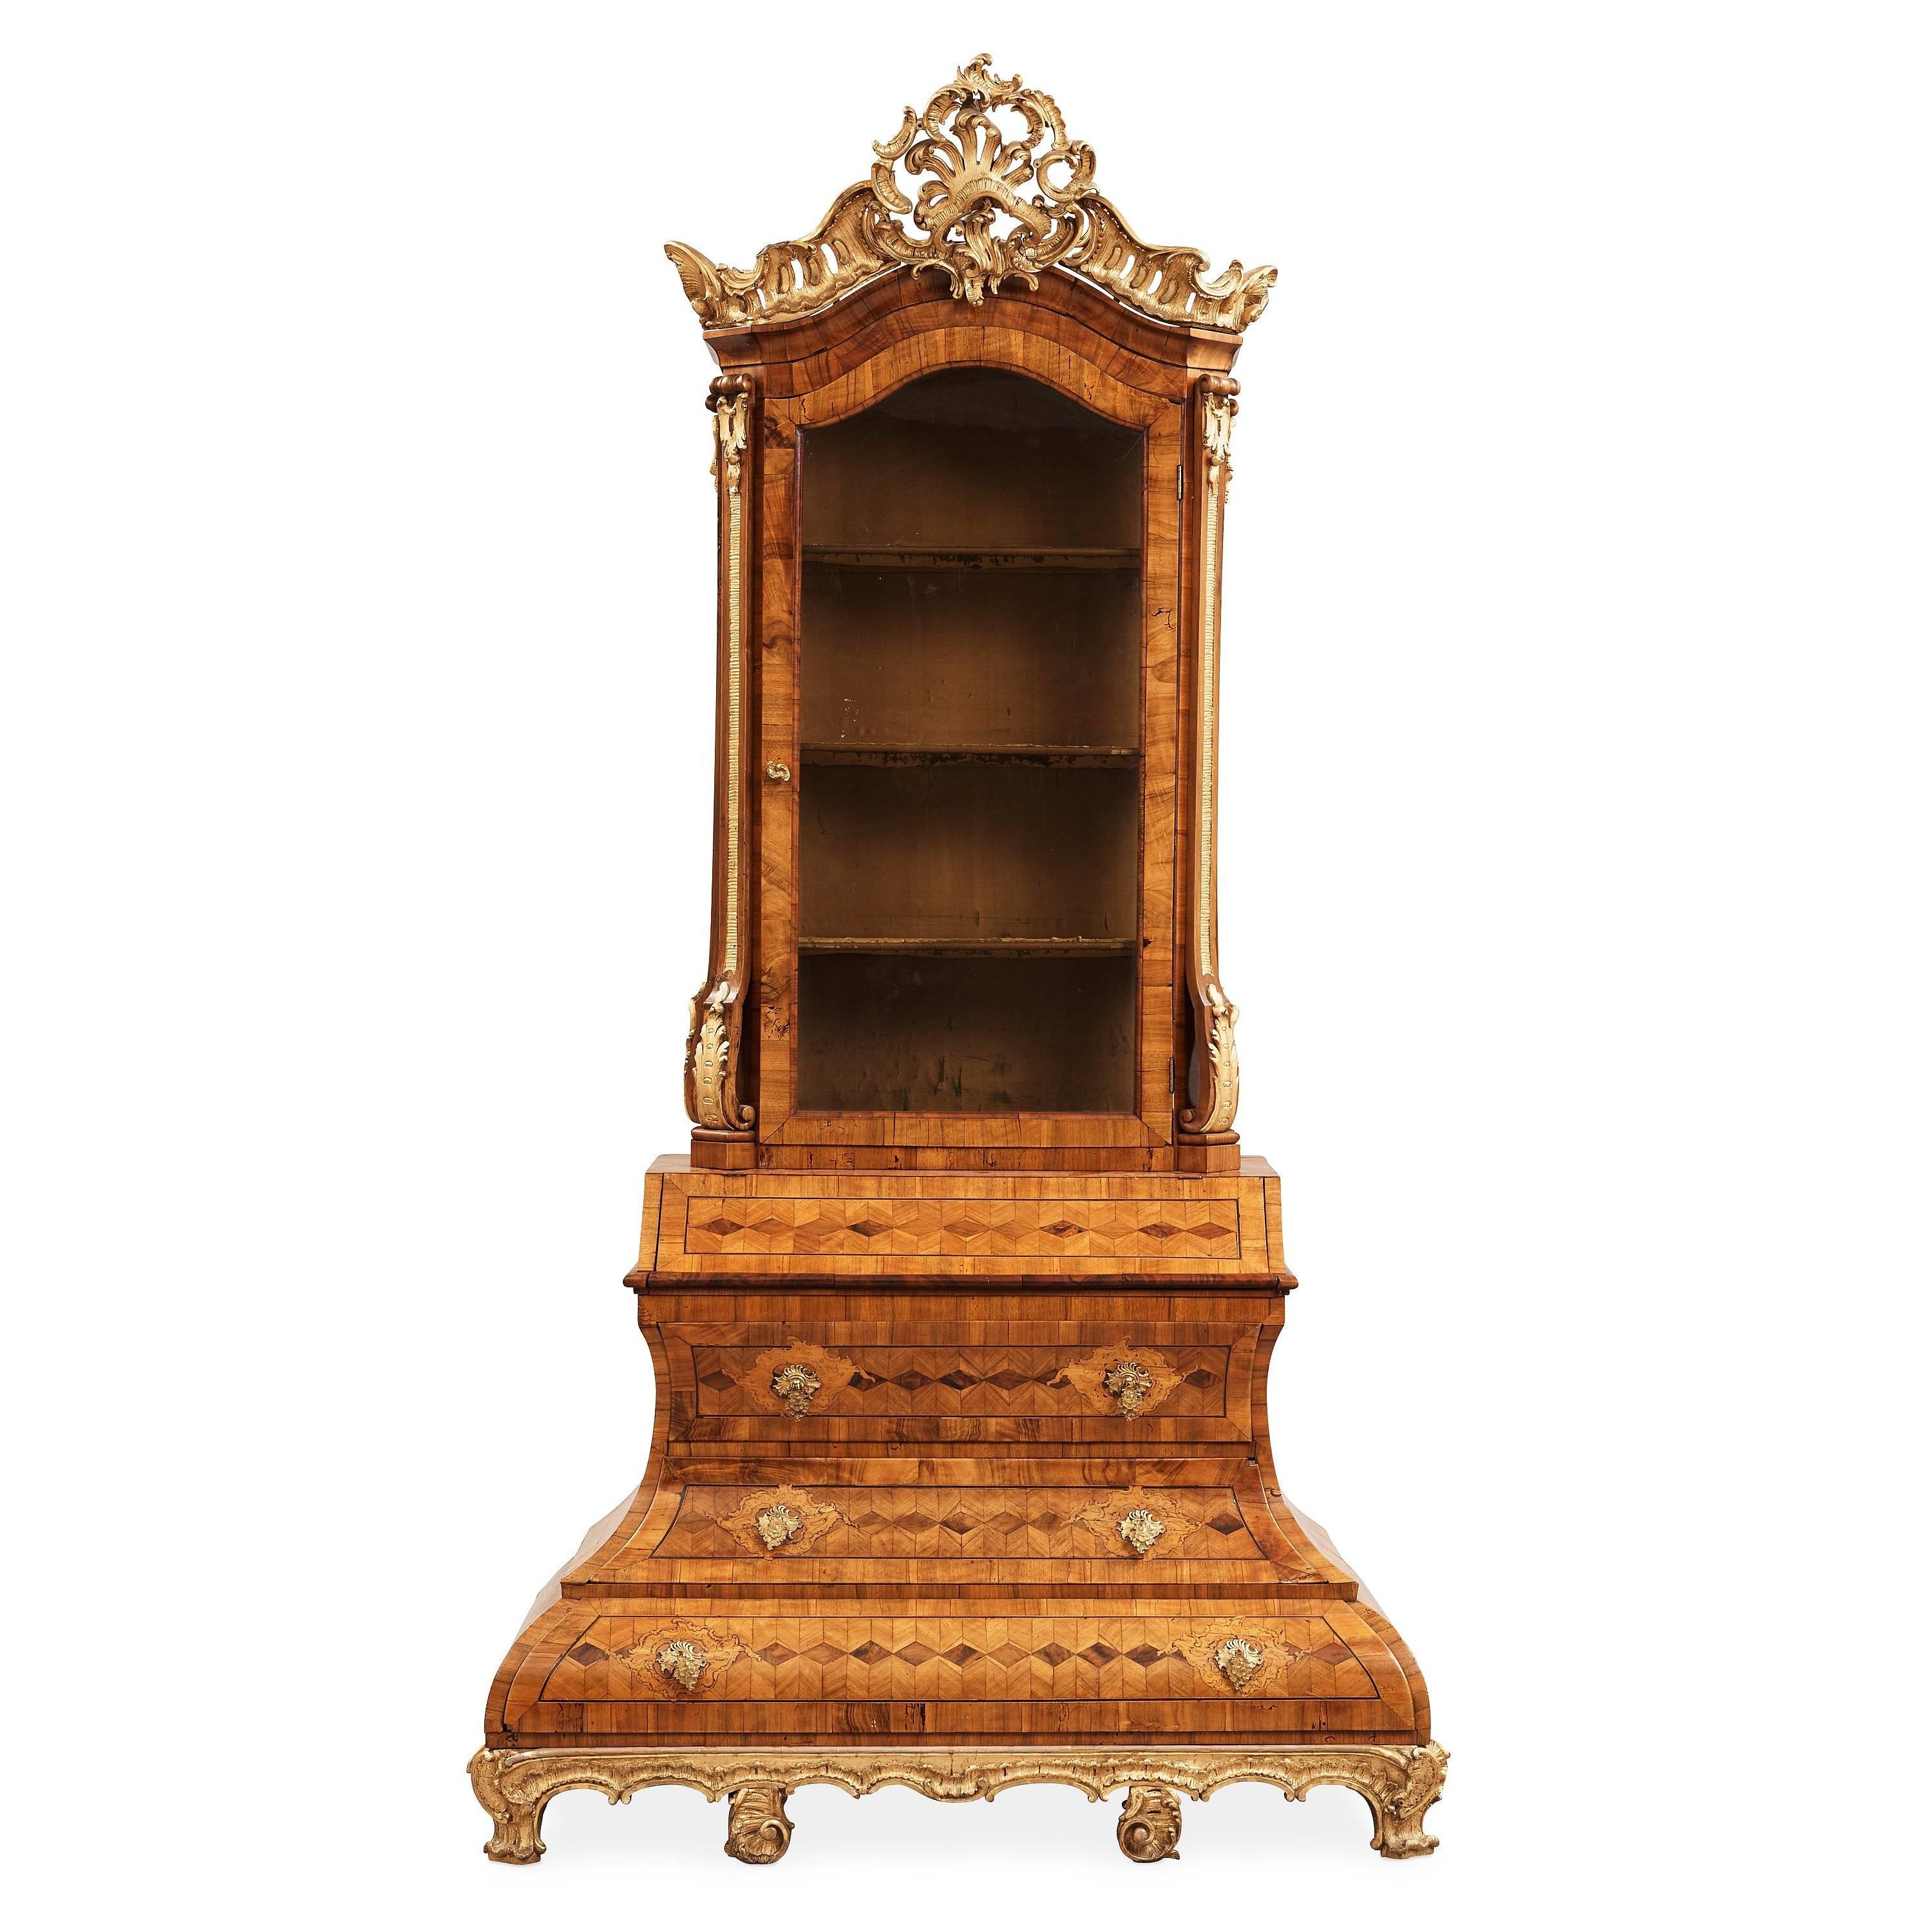 A small German 18th century Rococo cabinet of an unusual model.